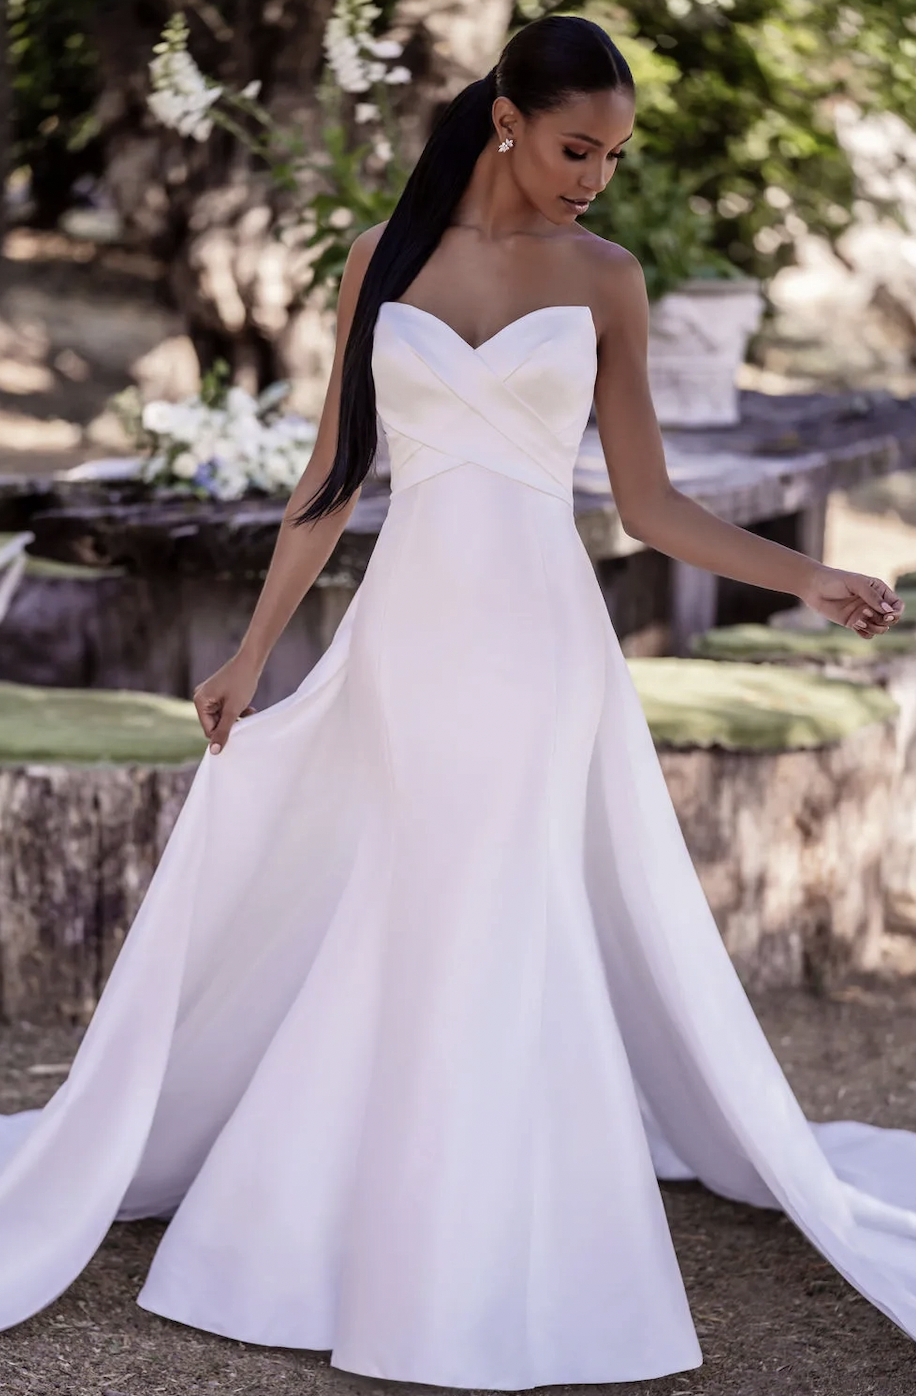 Our Favorite Clean + Fitted Wedding Dresses Image